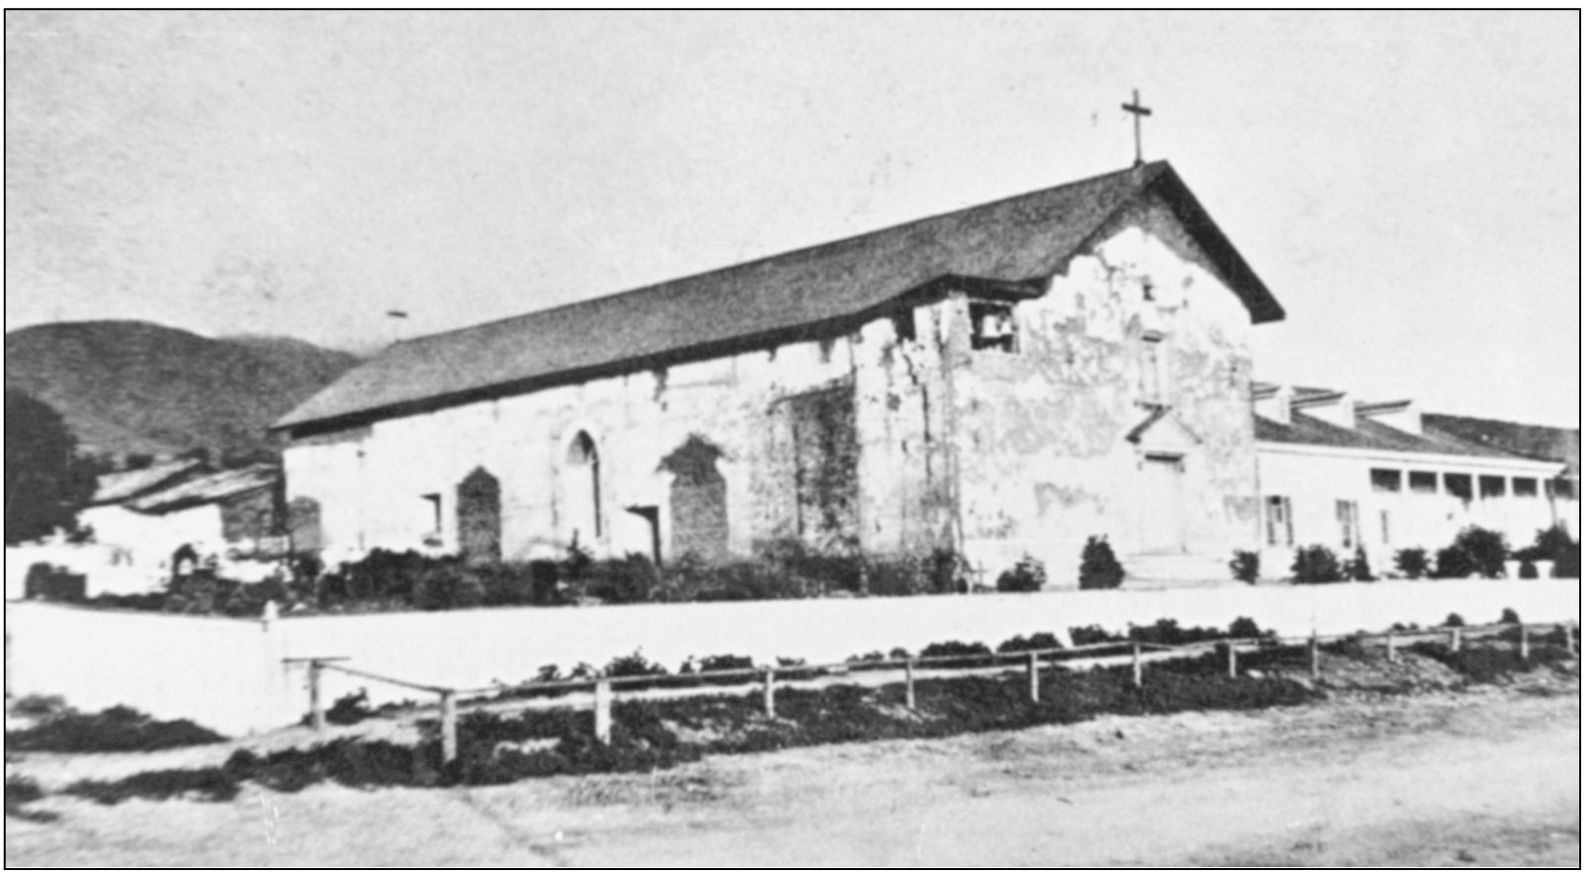 MISSION SAN JOSE 1867 Founded on June 11 1797 the acquired lands of La - photo 3